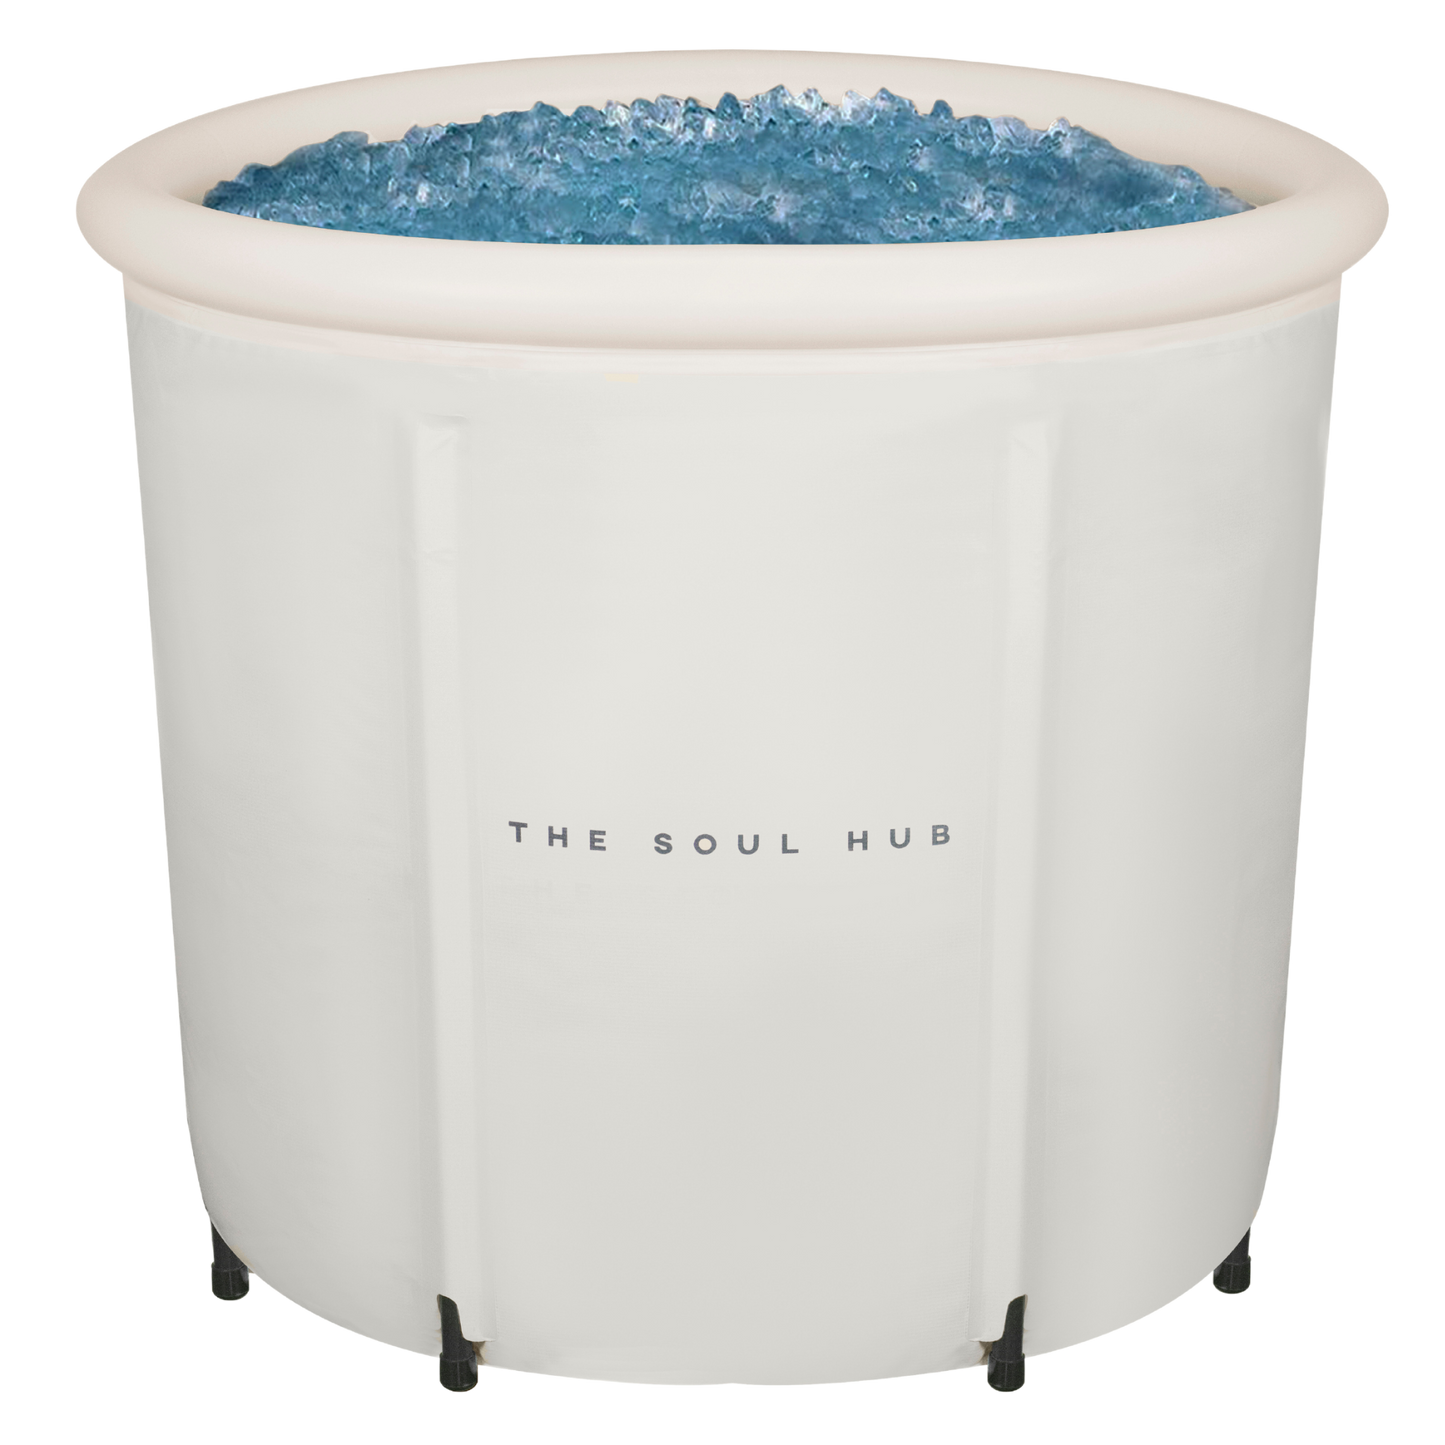 The Soul Hub v2.0 XL Portable Ice Bath - with proTECH™ cover